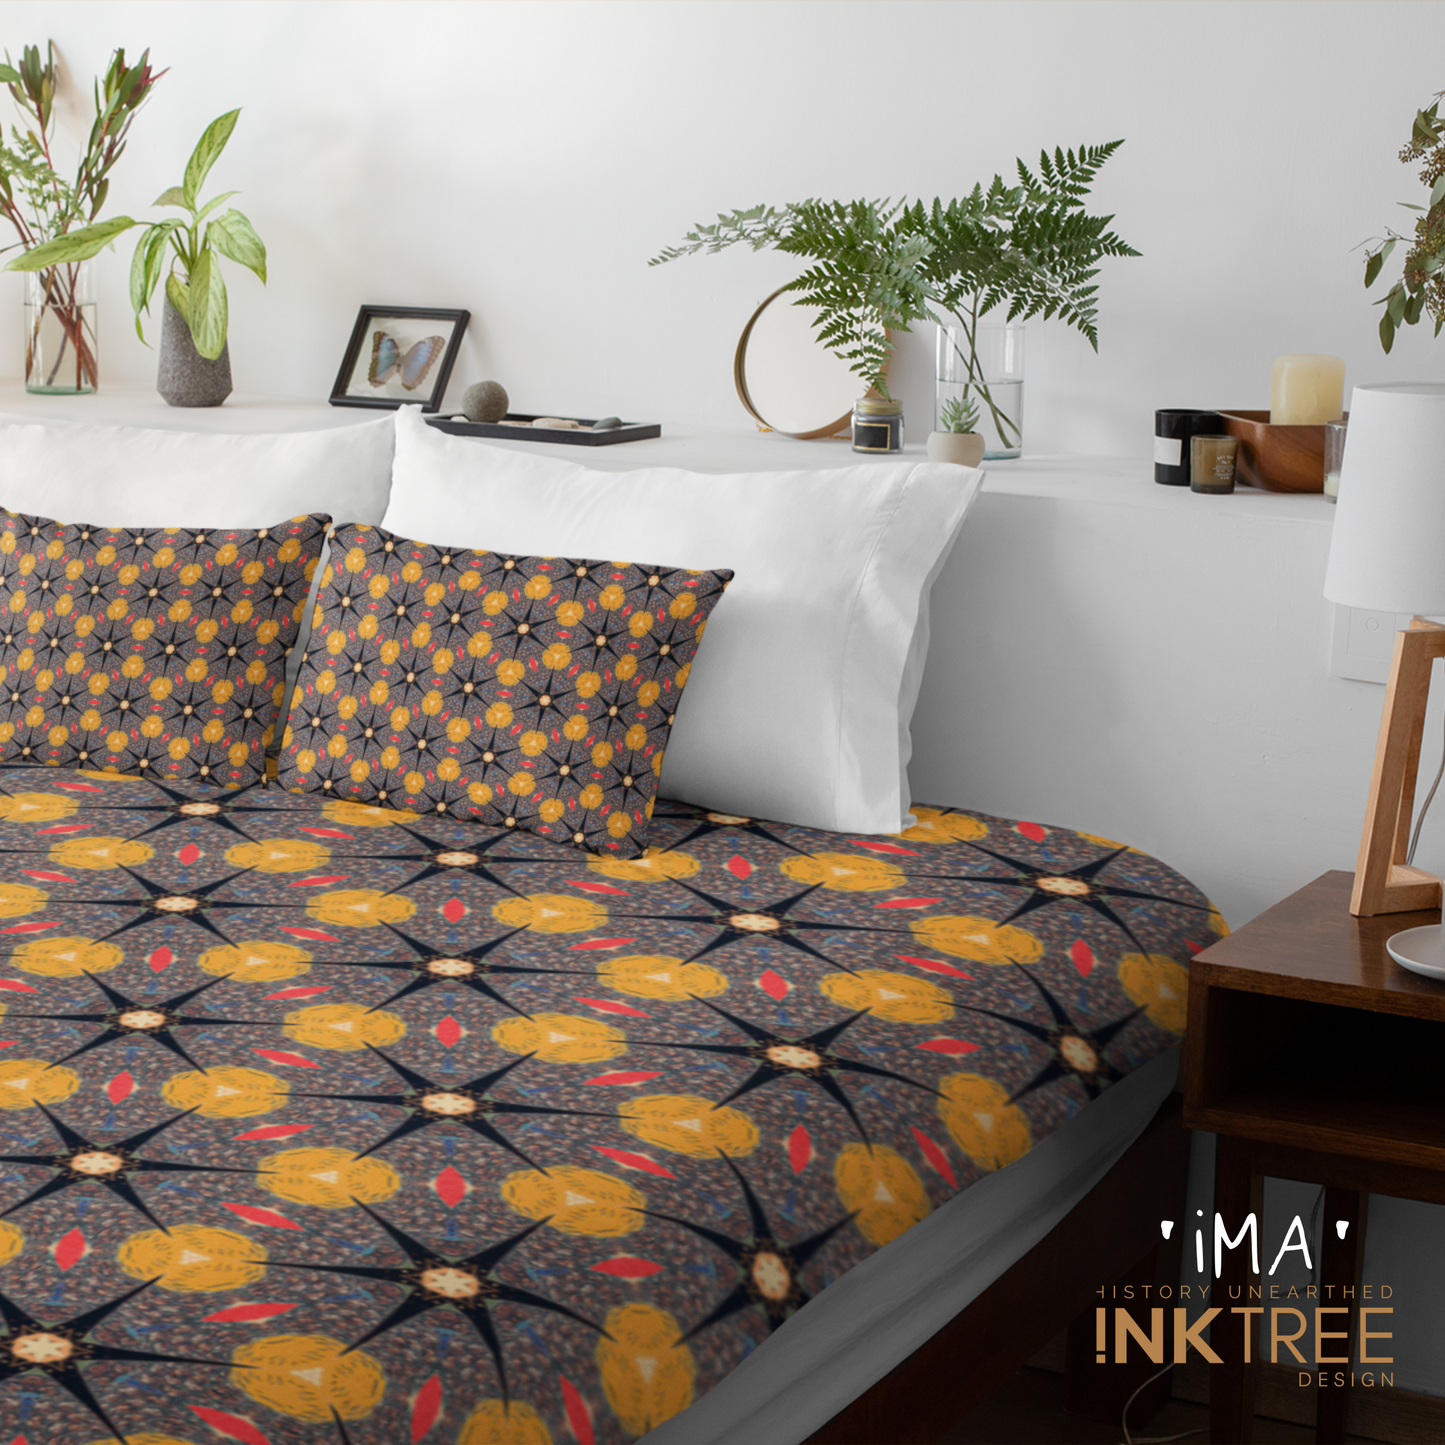 A quilt or doona cover and front pillows with a gold, black, blue, red and white oriental looking pattern on a bed with a white wall, white pillows and white backboard background. There is a lamp with a white shade and wood base and plants and a small round metal mirror on the back board. There is also a ima, history unearthed ink tree design logo in the bottom right hand corner on it.